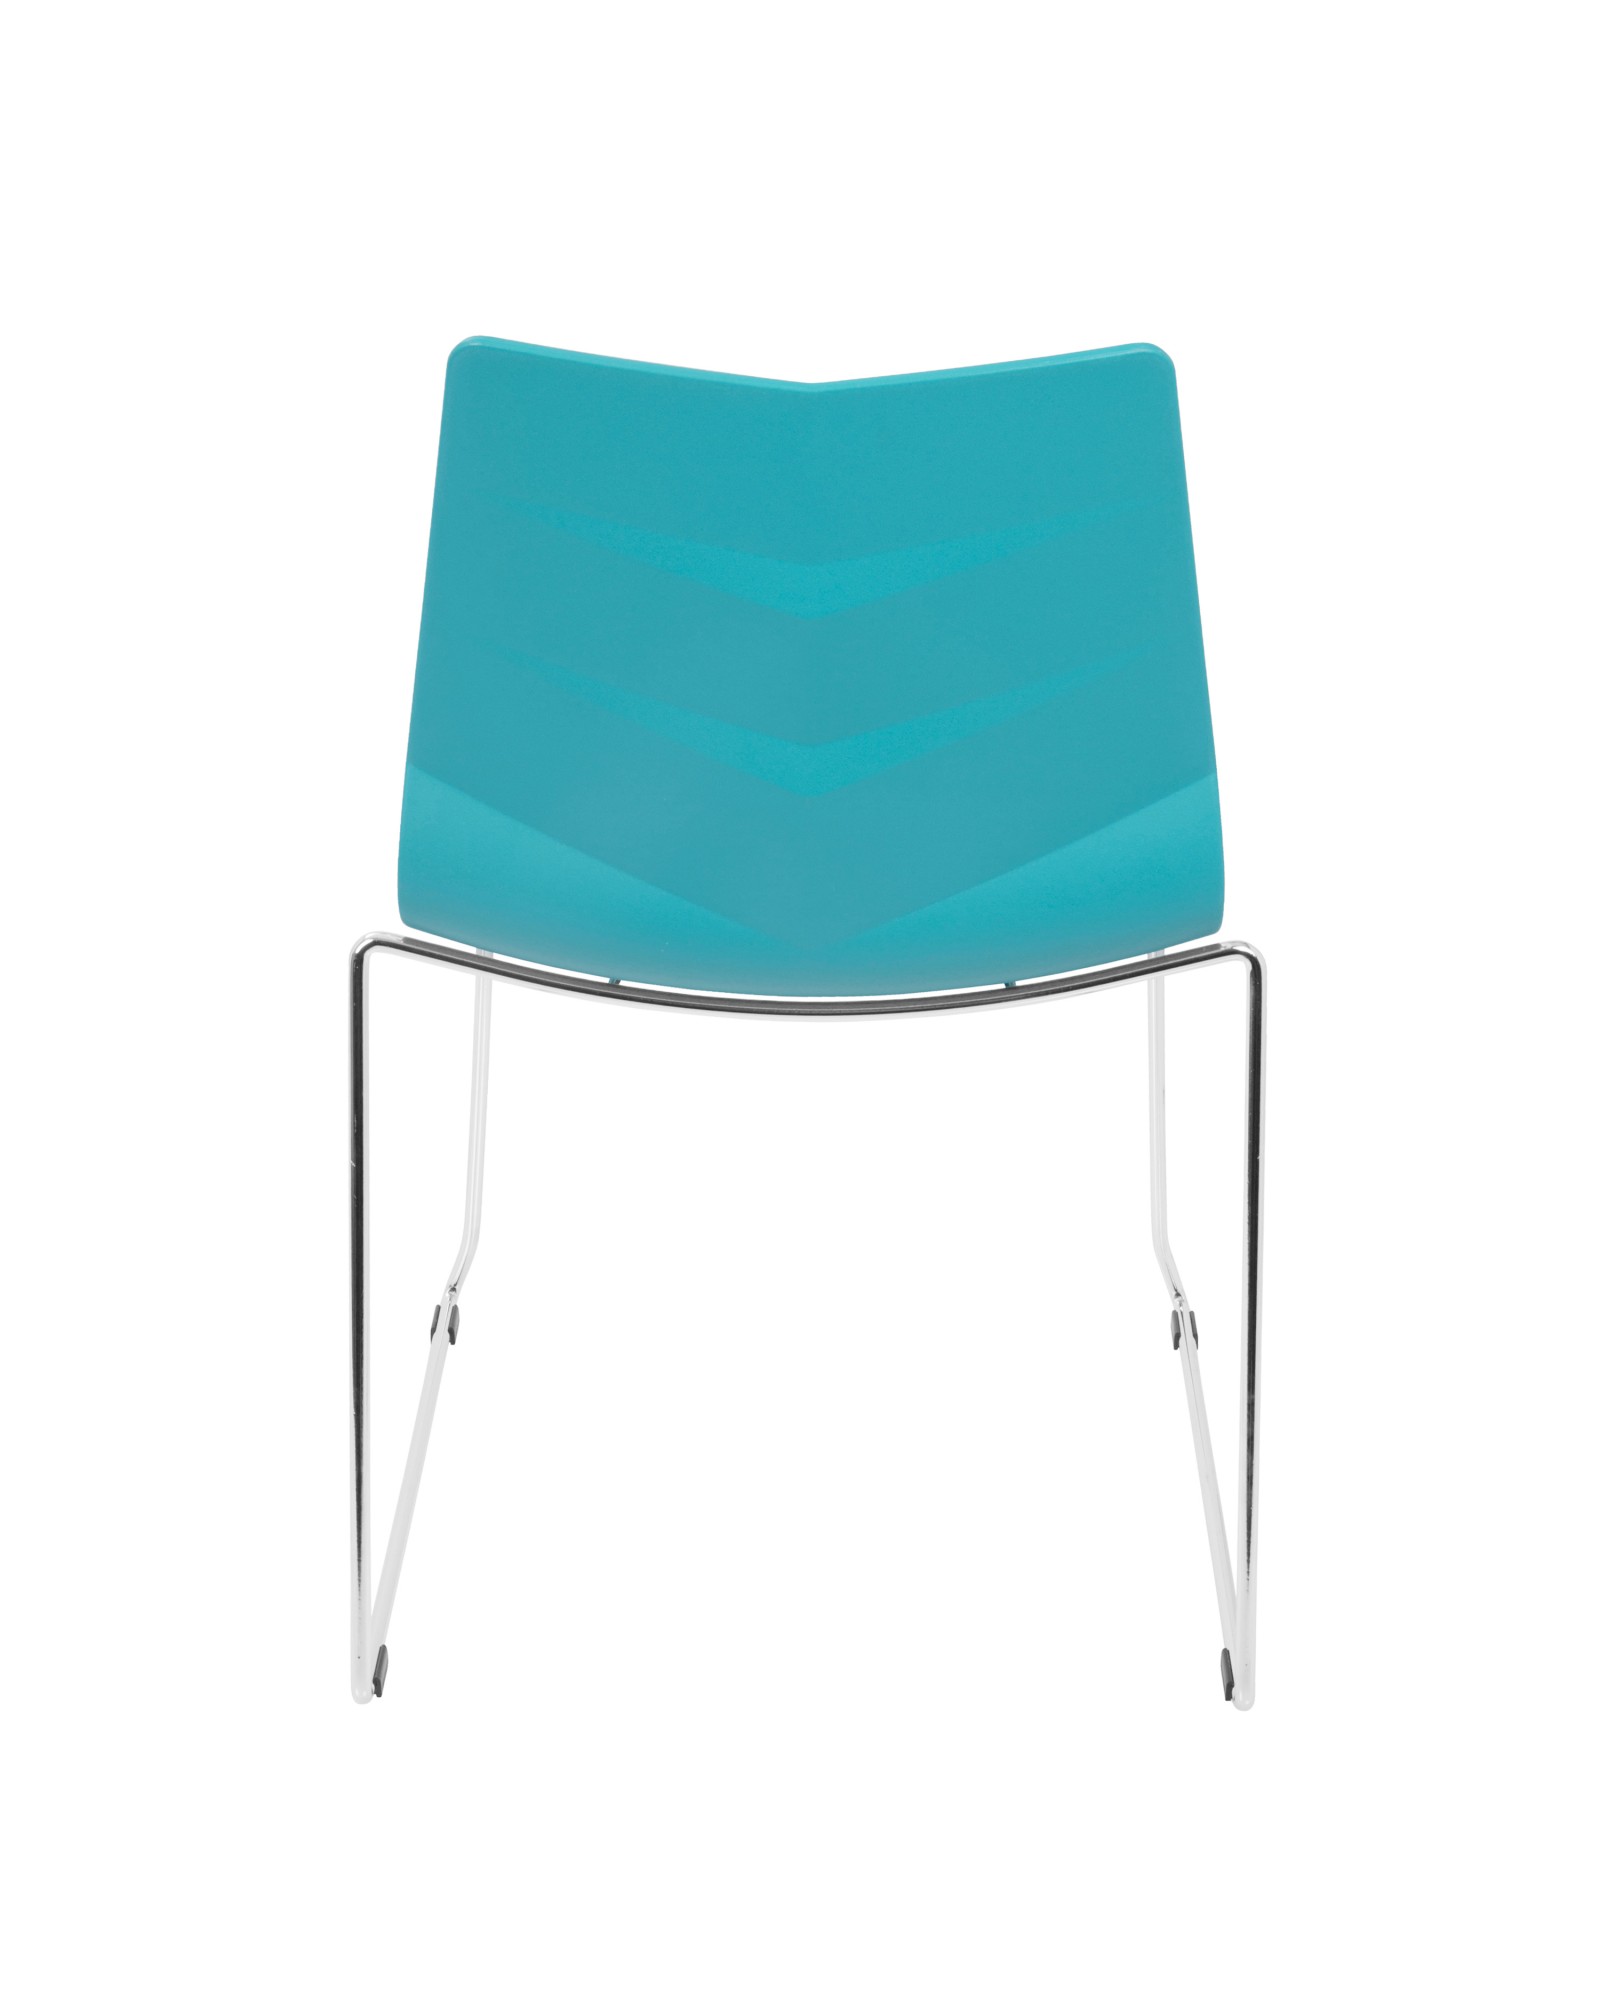 Arrow Contemporary Dining Chair in Turquoise - Set of 2